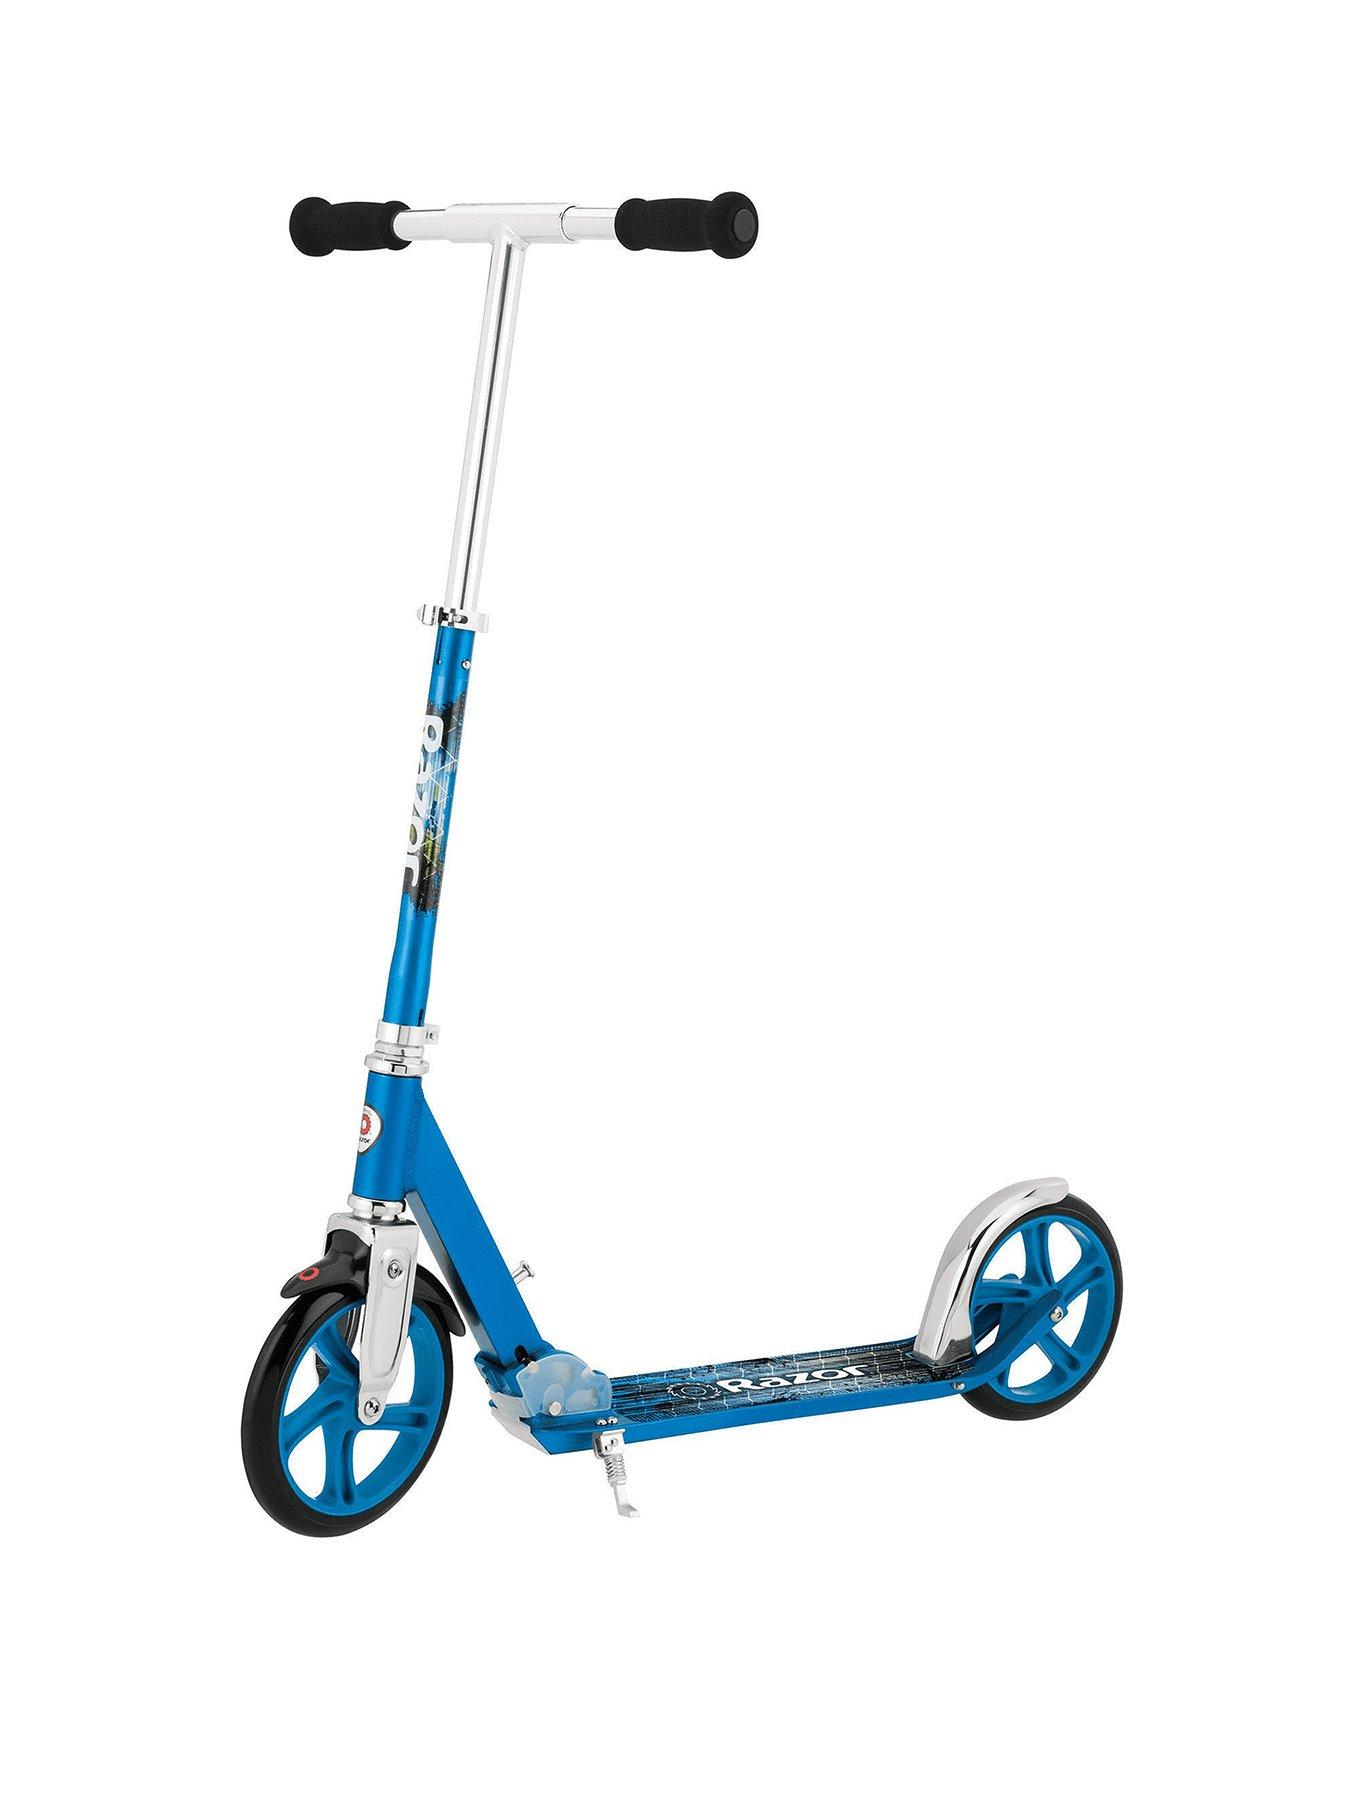 Blue STUNT ABILITY Sturdy steel frame Details about   Freestyle Scooter BEGINNER FRIENDLY 